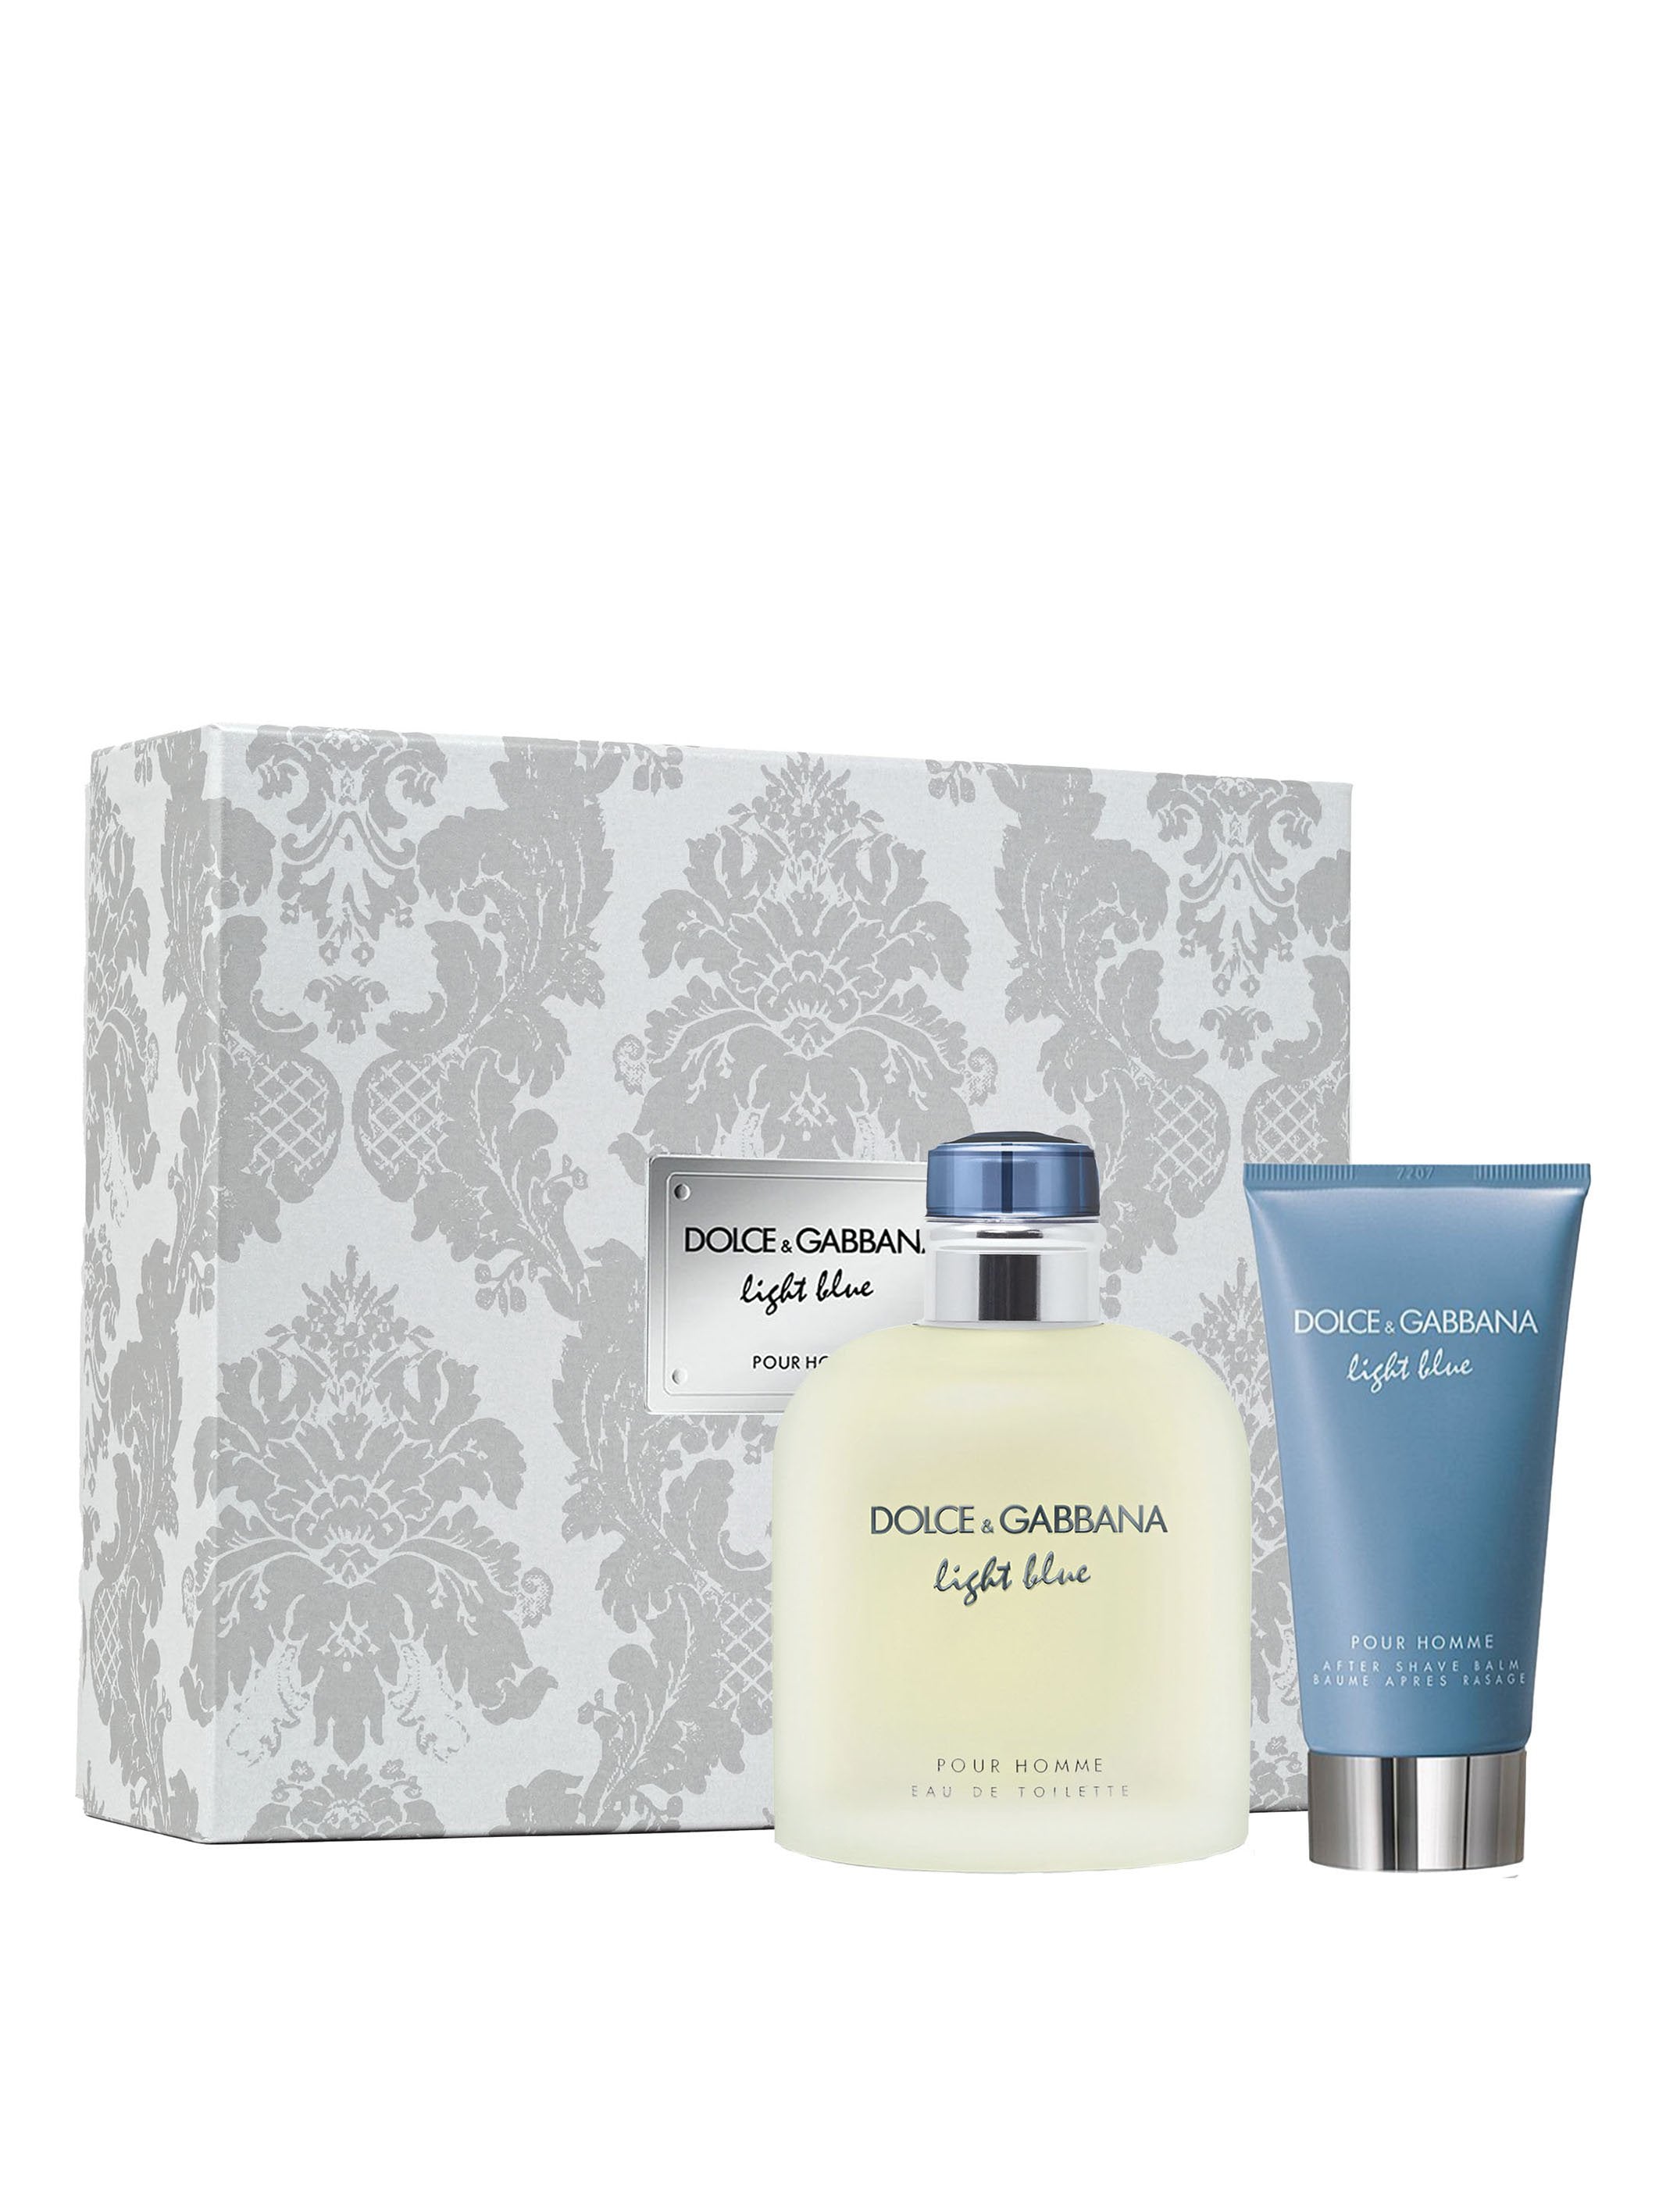 dolce and gabbana light blue after shave balm